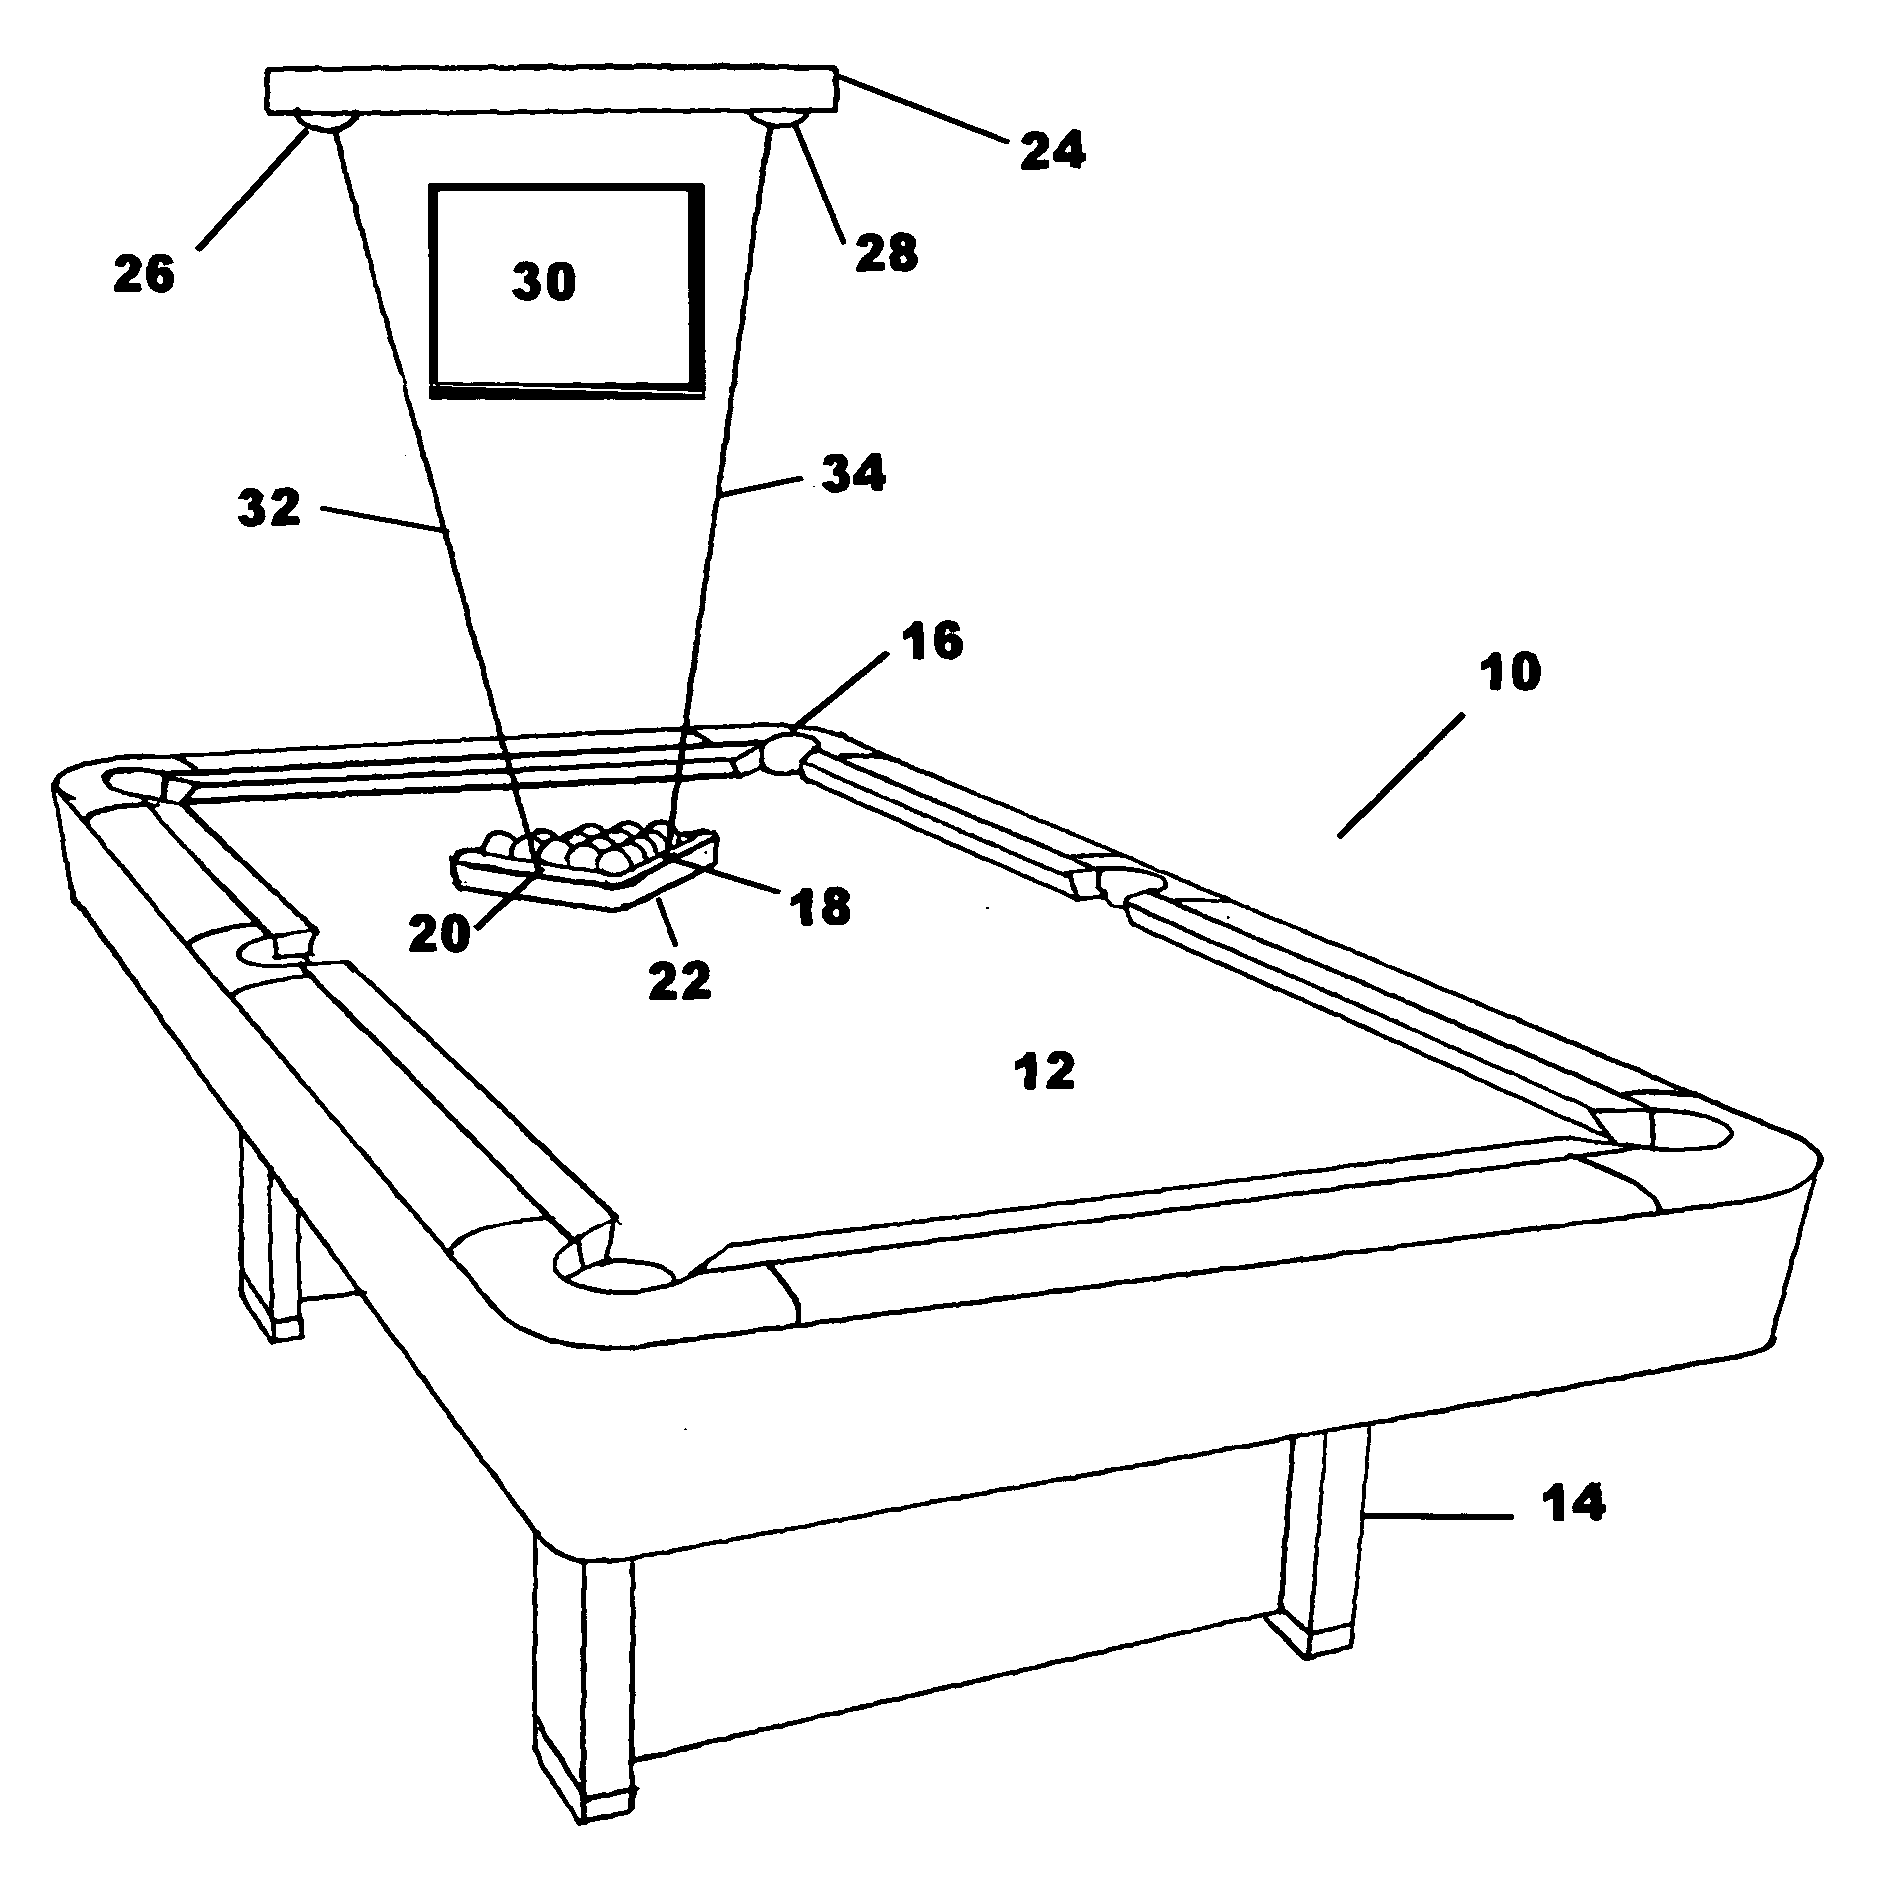 Method and apparatus for positioning a billiard game rack